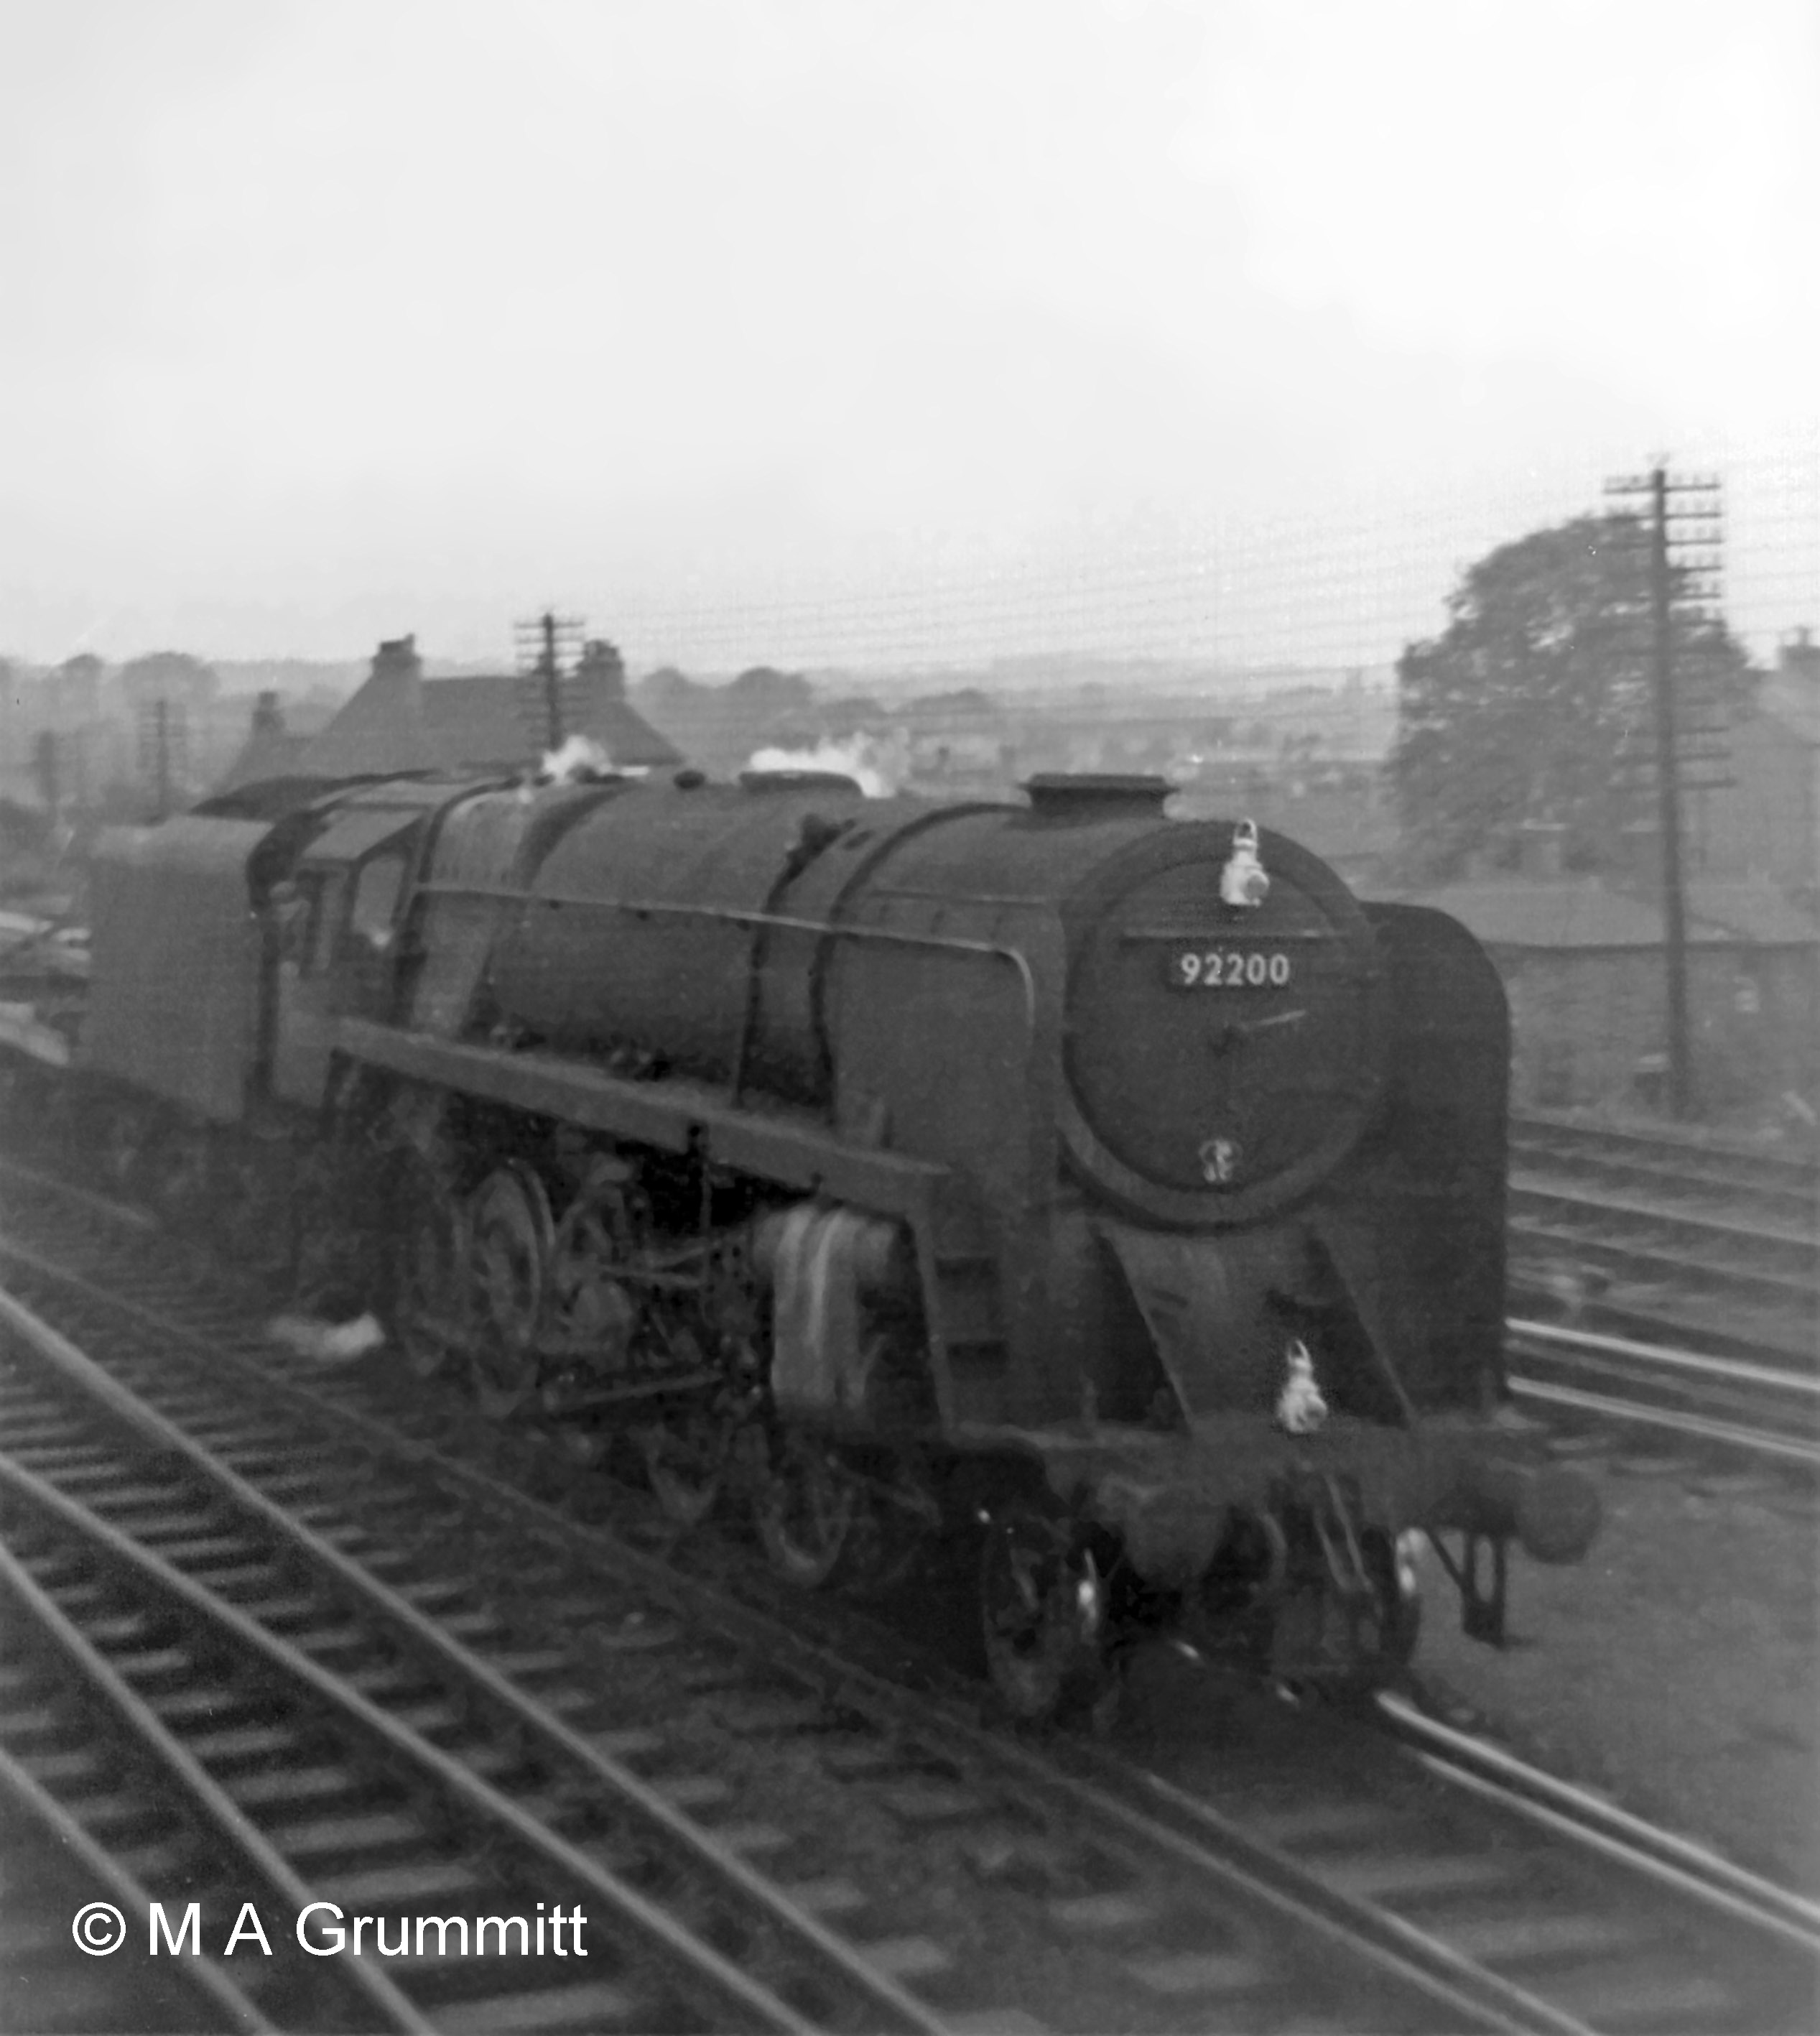 No. 92200 of Doncaster shows a Class H headlamp code for a through freight or ballast train. This locomotive, completed at the end of 1958, was in service for less than seven years. Photograph by Mick Grummitt.